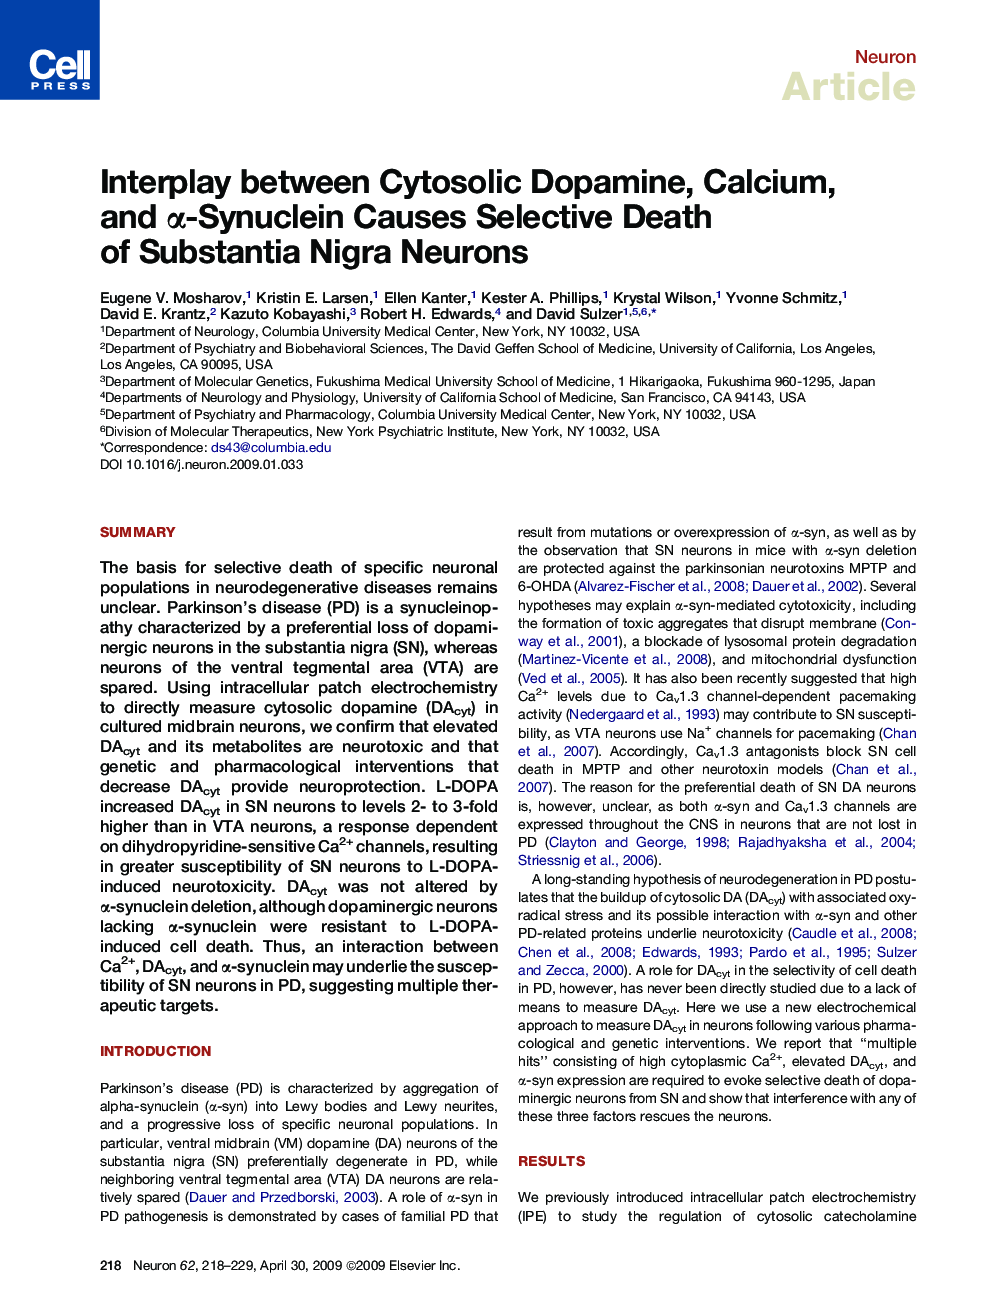 Interplay between Cytosolic Dopamine, Calcium, and α-Synuclein Causes Selective Death of Substantia Nigra Neurons